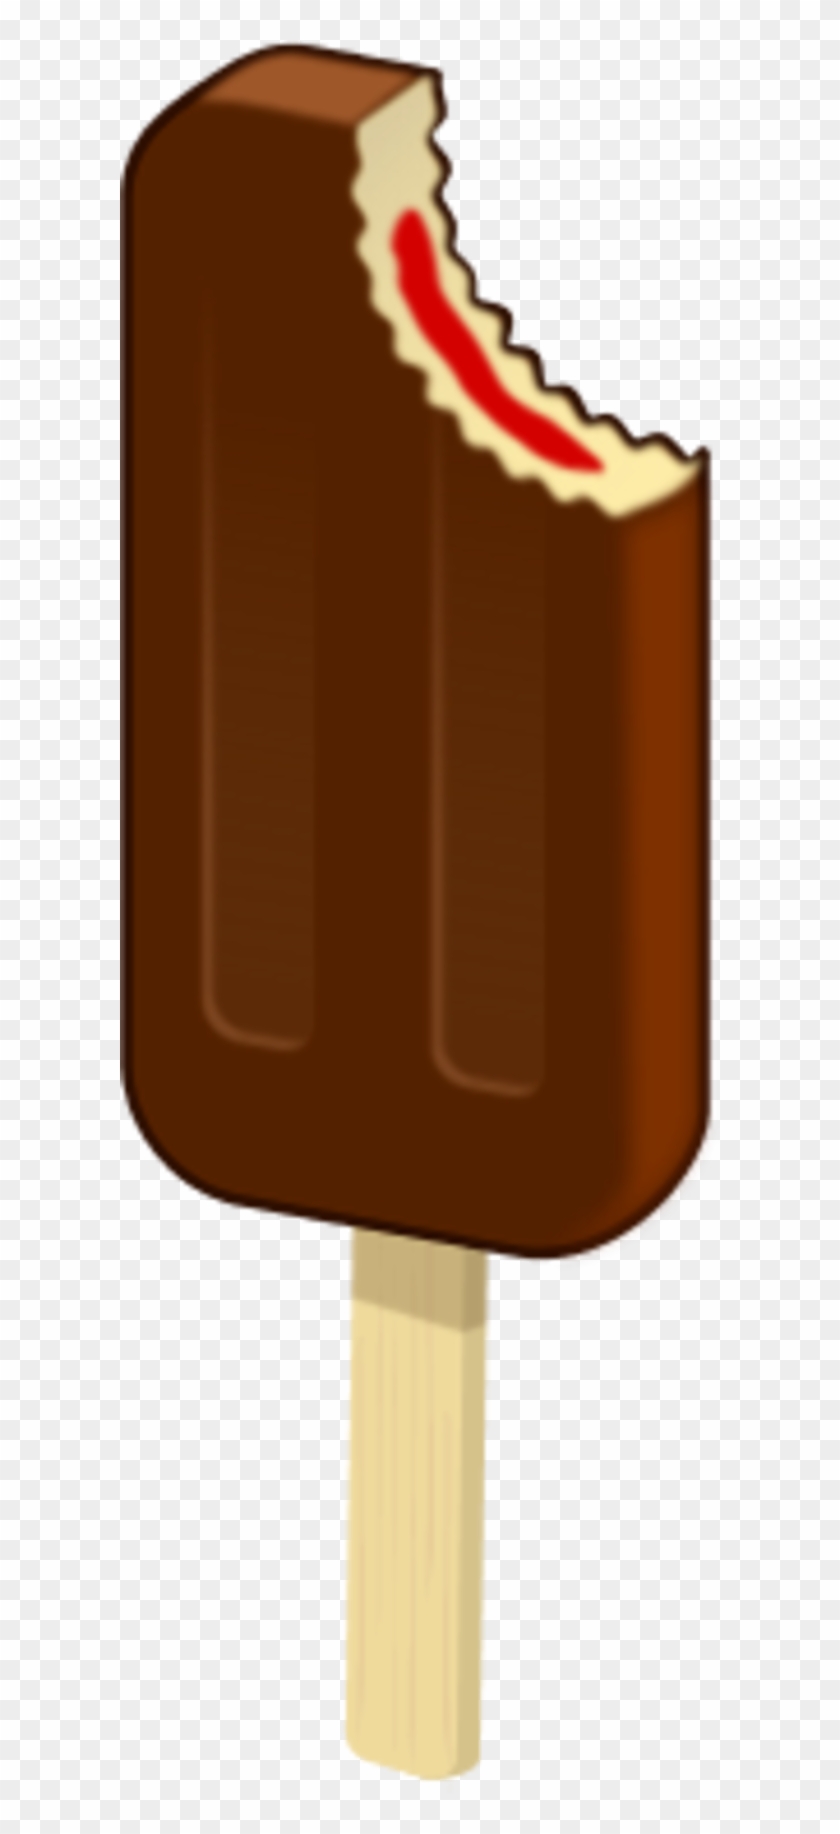 Chocolate Ice Cream Clipart - Chocolate Popsicle Clipart #554632